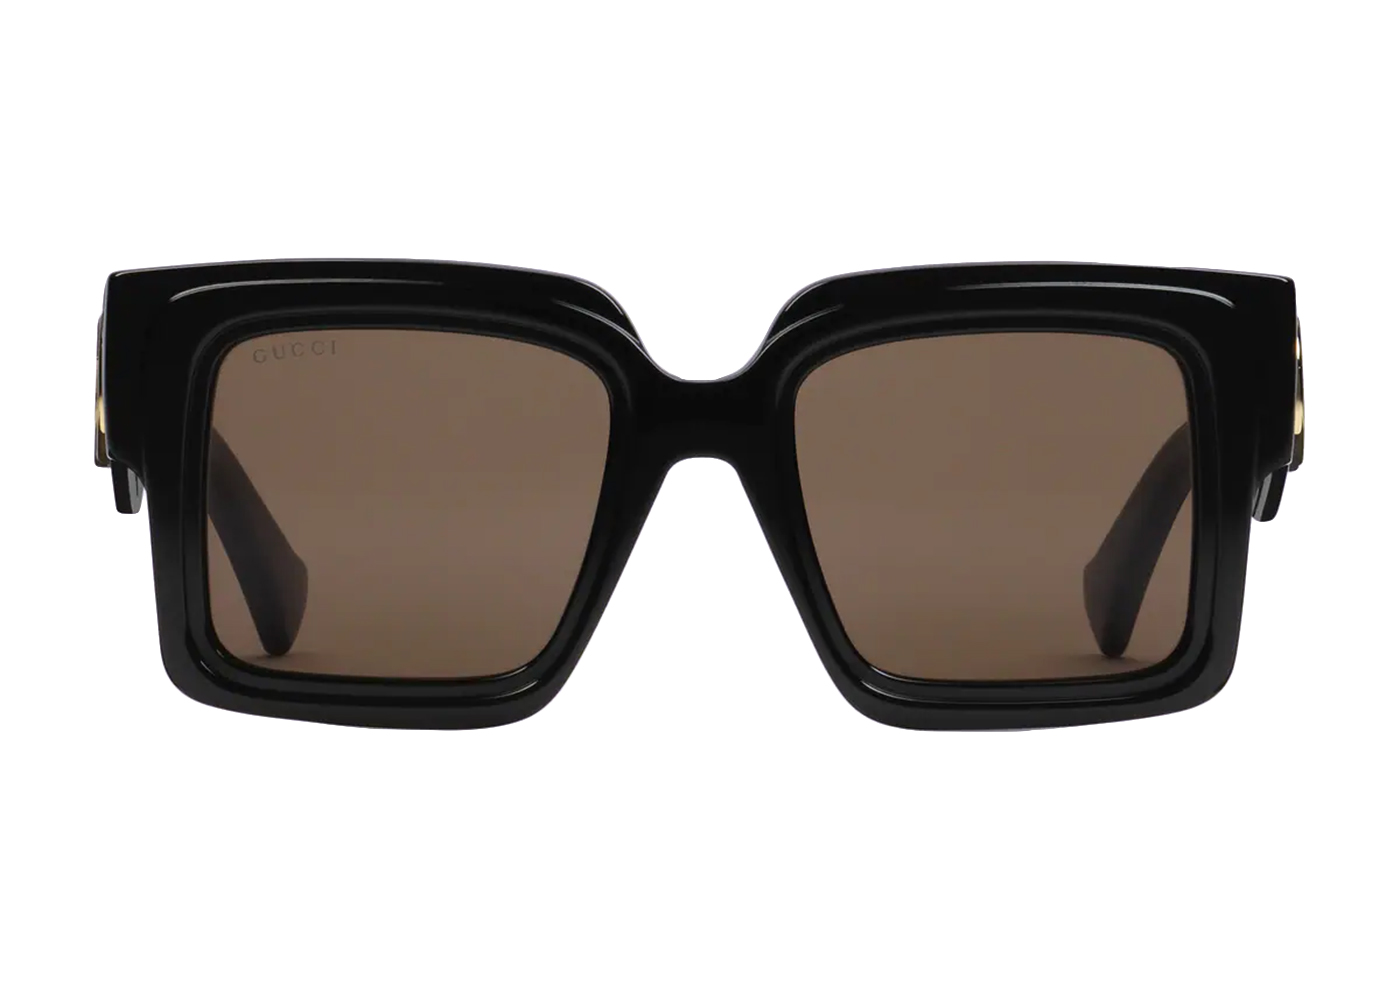 Gucci 57MM Square Sunglasses on SALE | Saks OFF 5TH